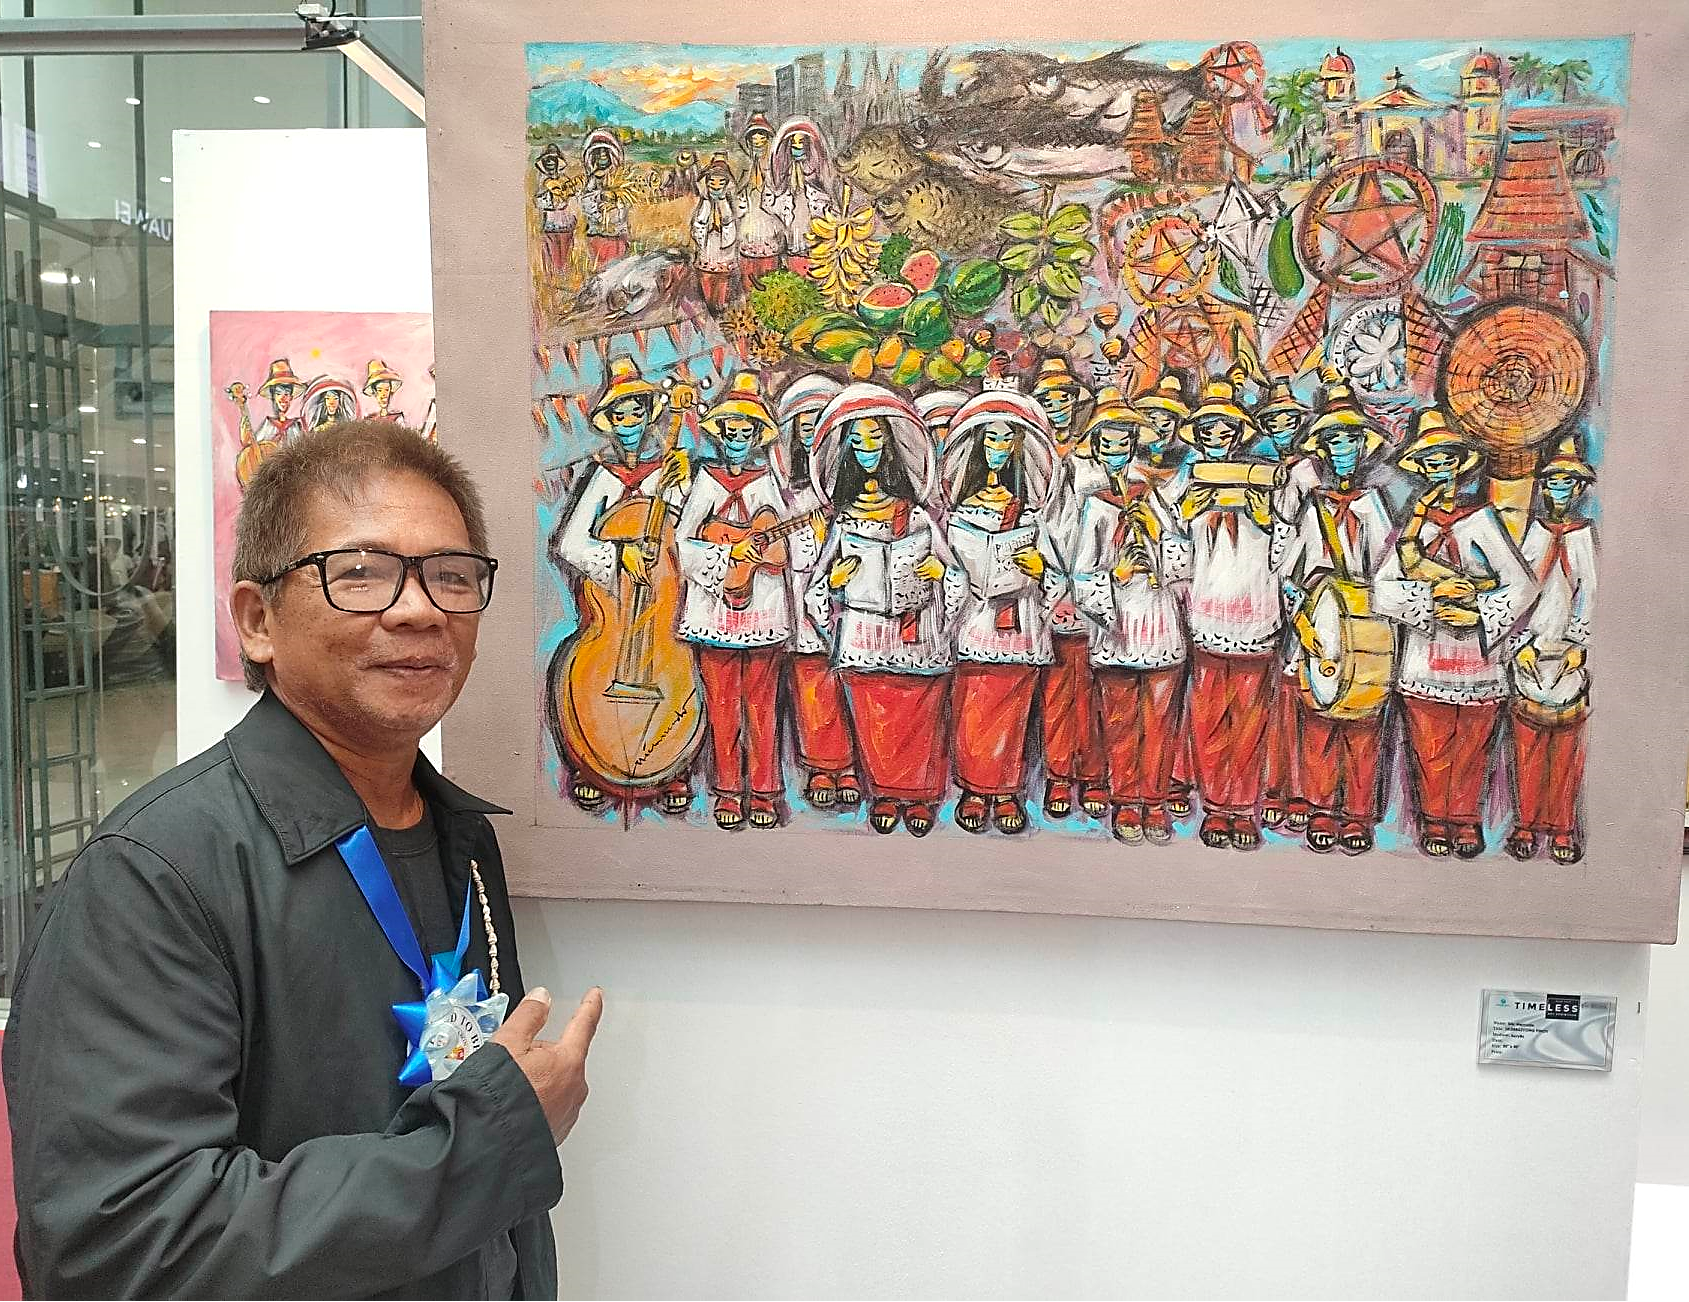 philippine culture paintings